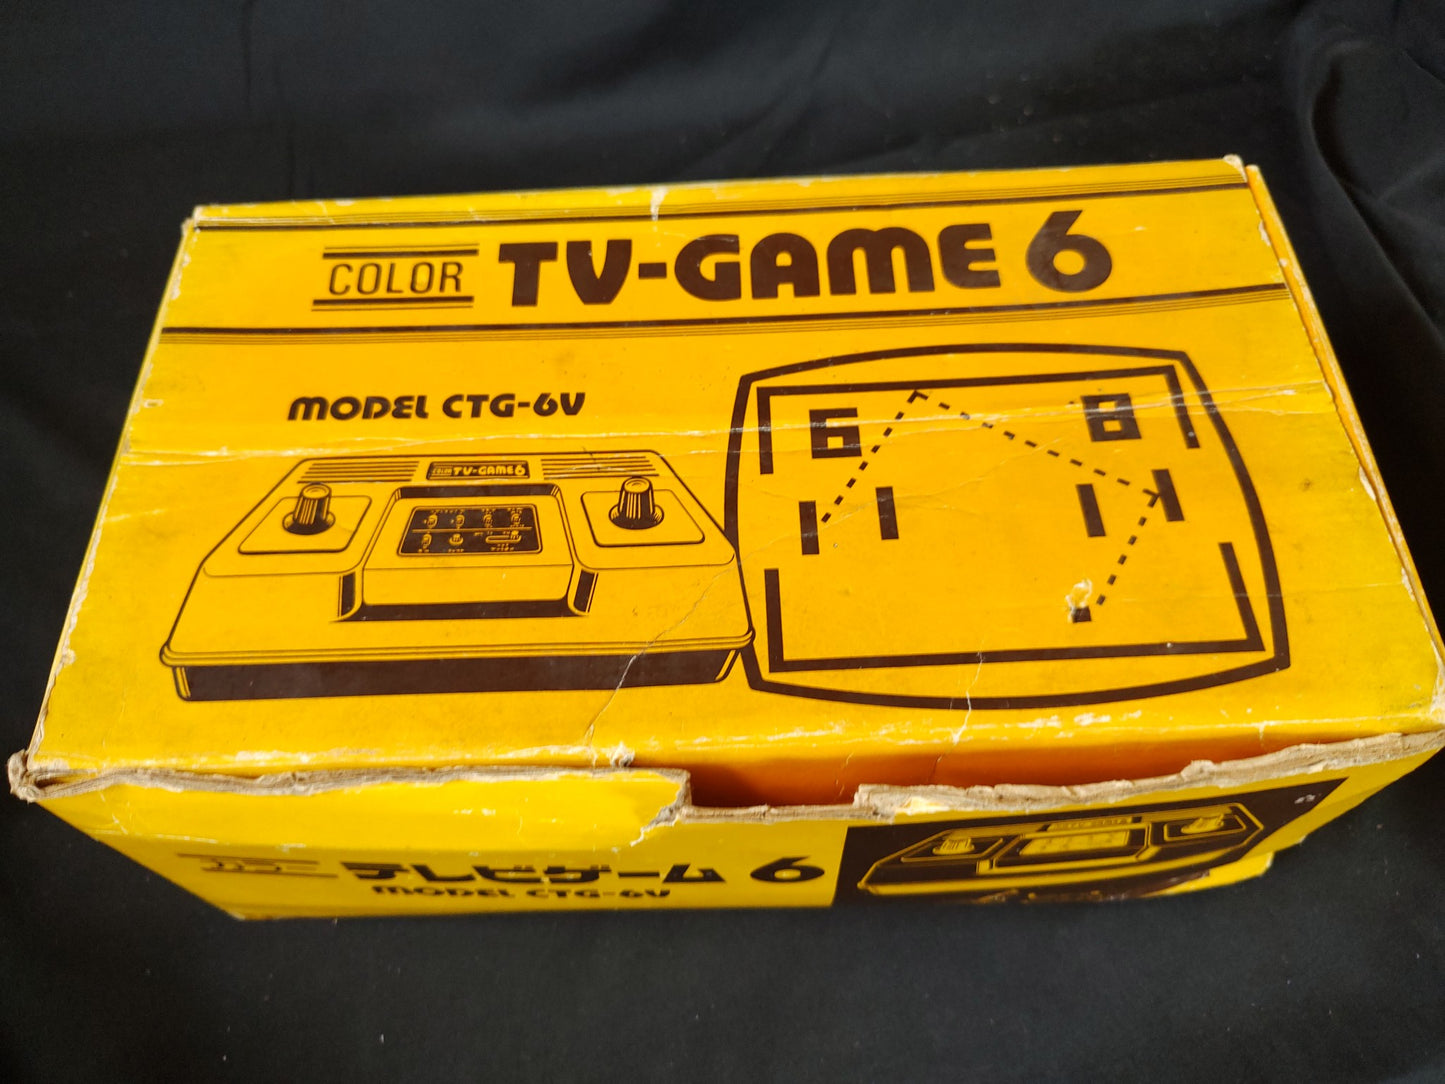 Nintendo TV GAME 6 (CTG-6V) console system, RF switch, Box set. Working-f0914-1